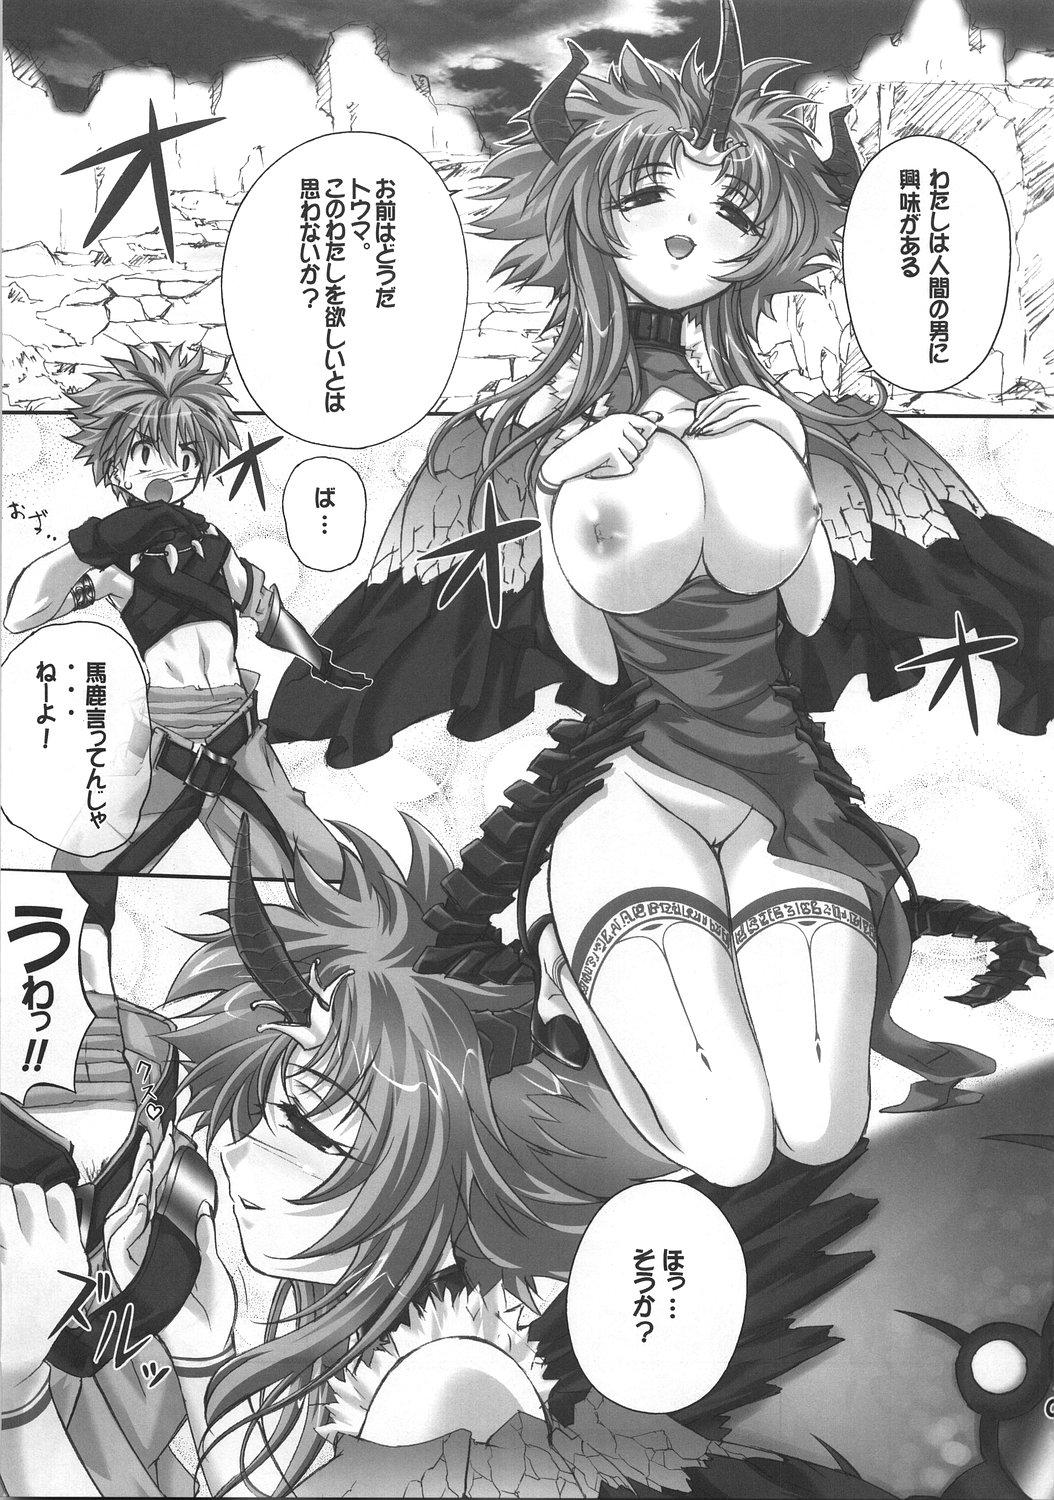 Latino Cyriltte Level Janee zo! - Shining force exa Huge Boobs - Page 4